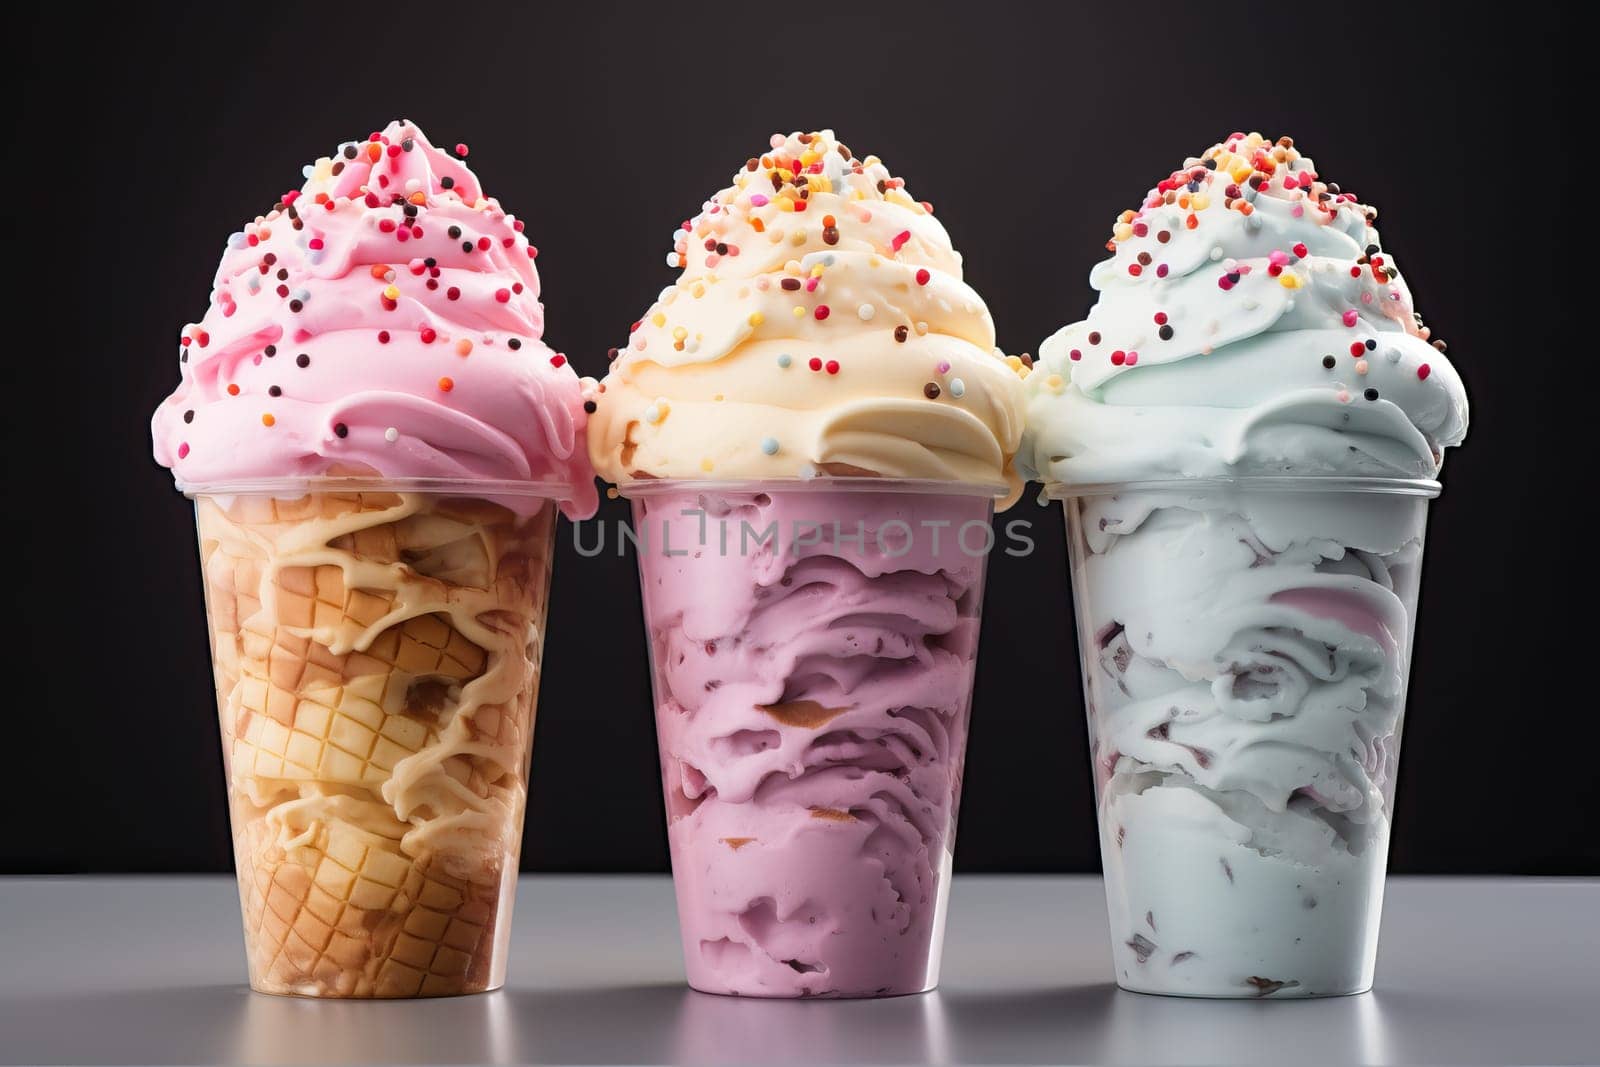 Mixed ice cream with different flavors and colored small balls decorations on a black background.